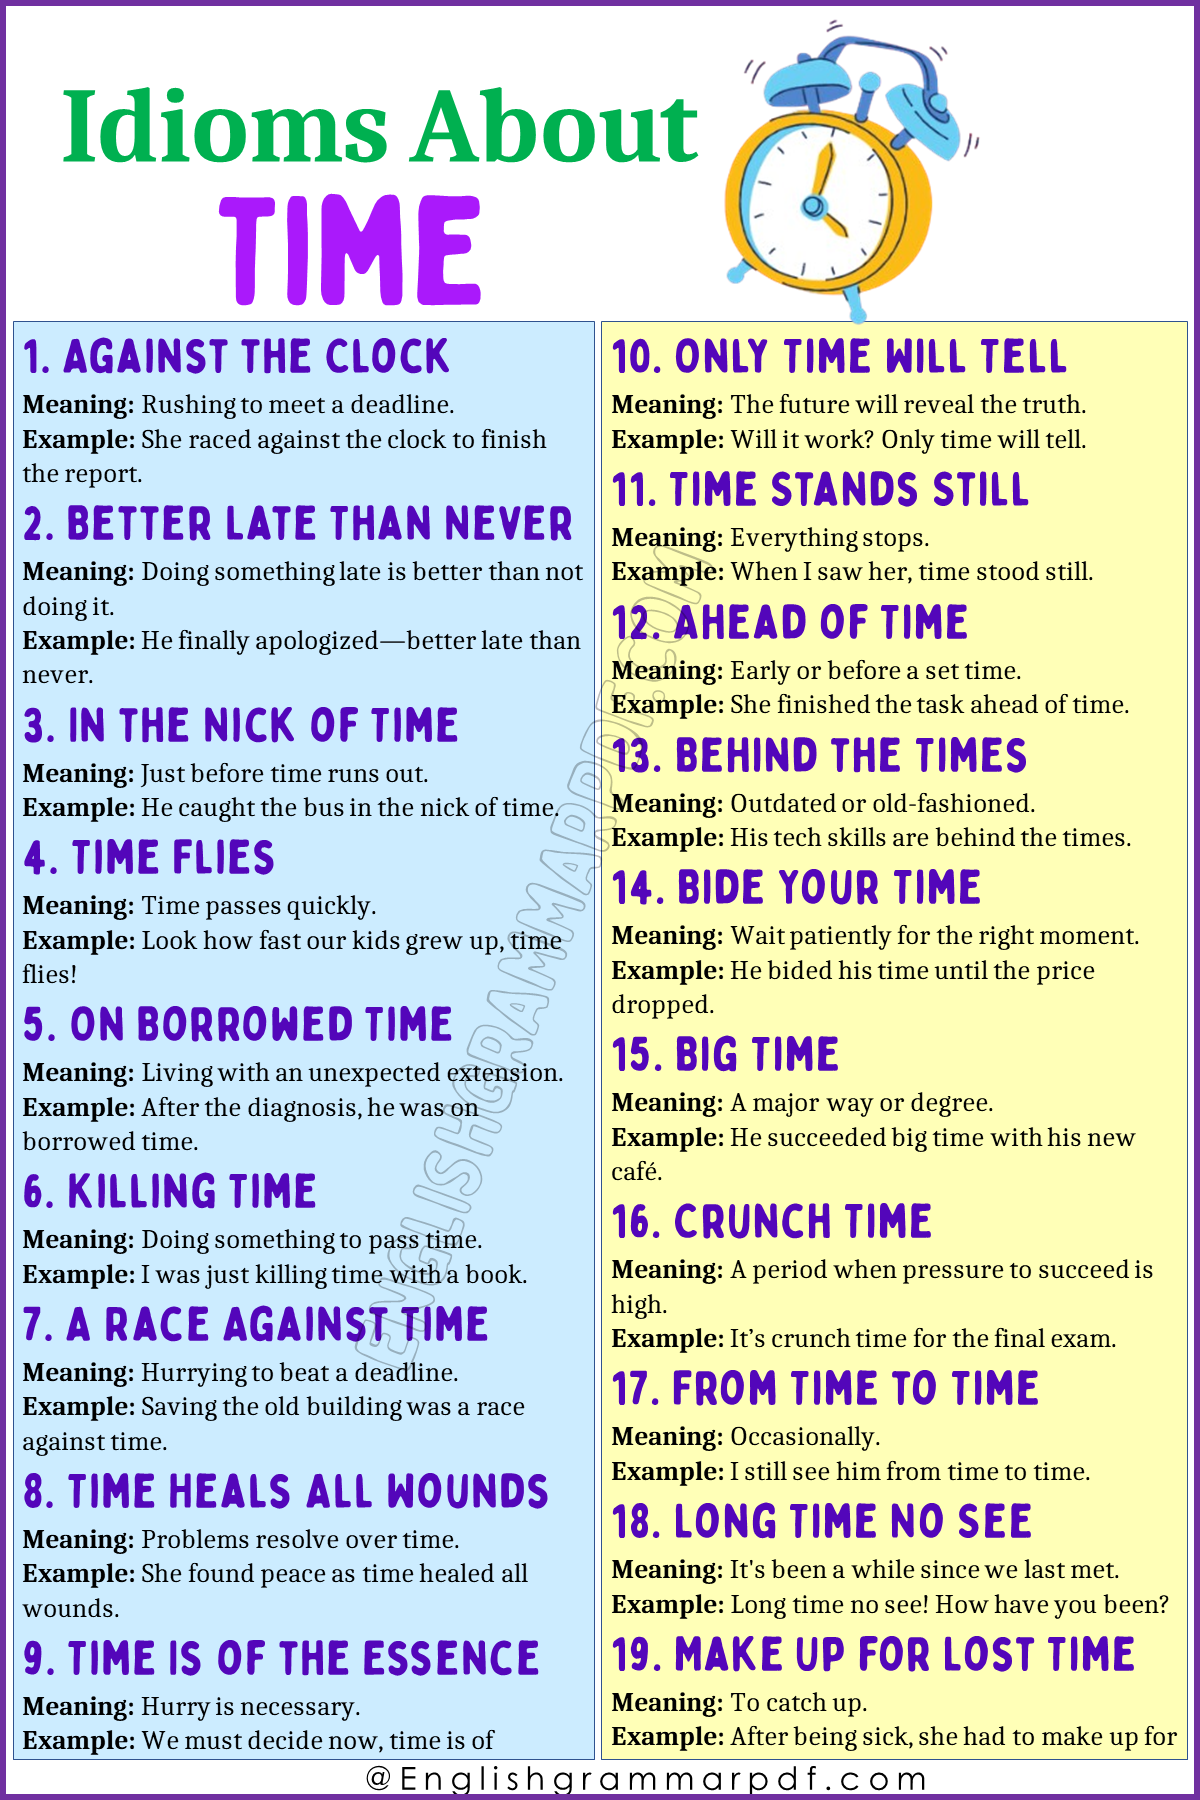 Idioms About Time